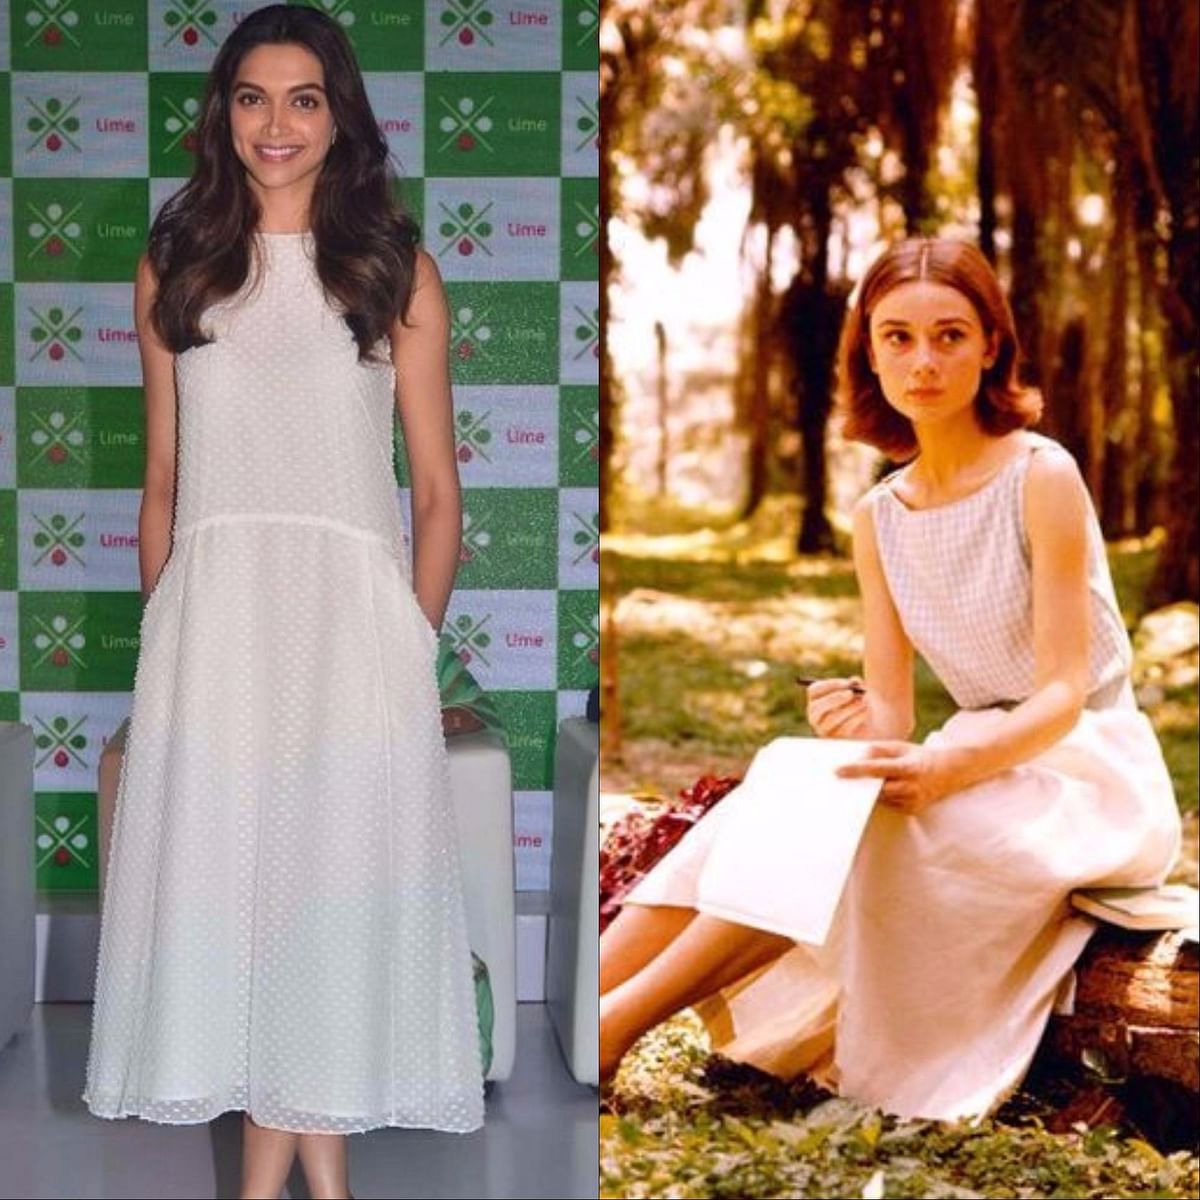 On Audrey Hepburn’s birthday,  we look at how Bollywood is still in love with her style.